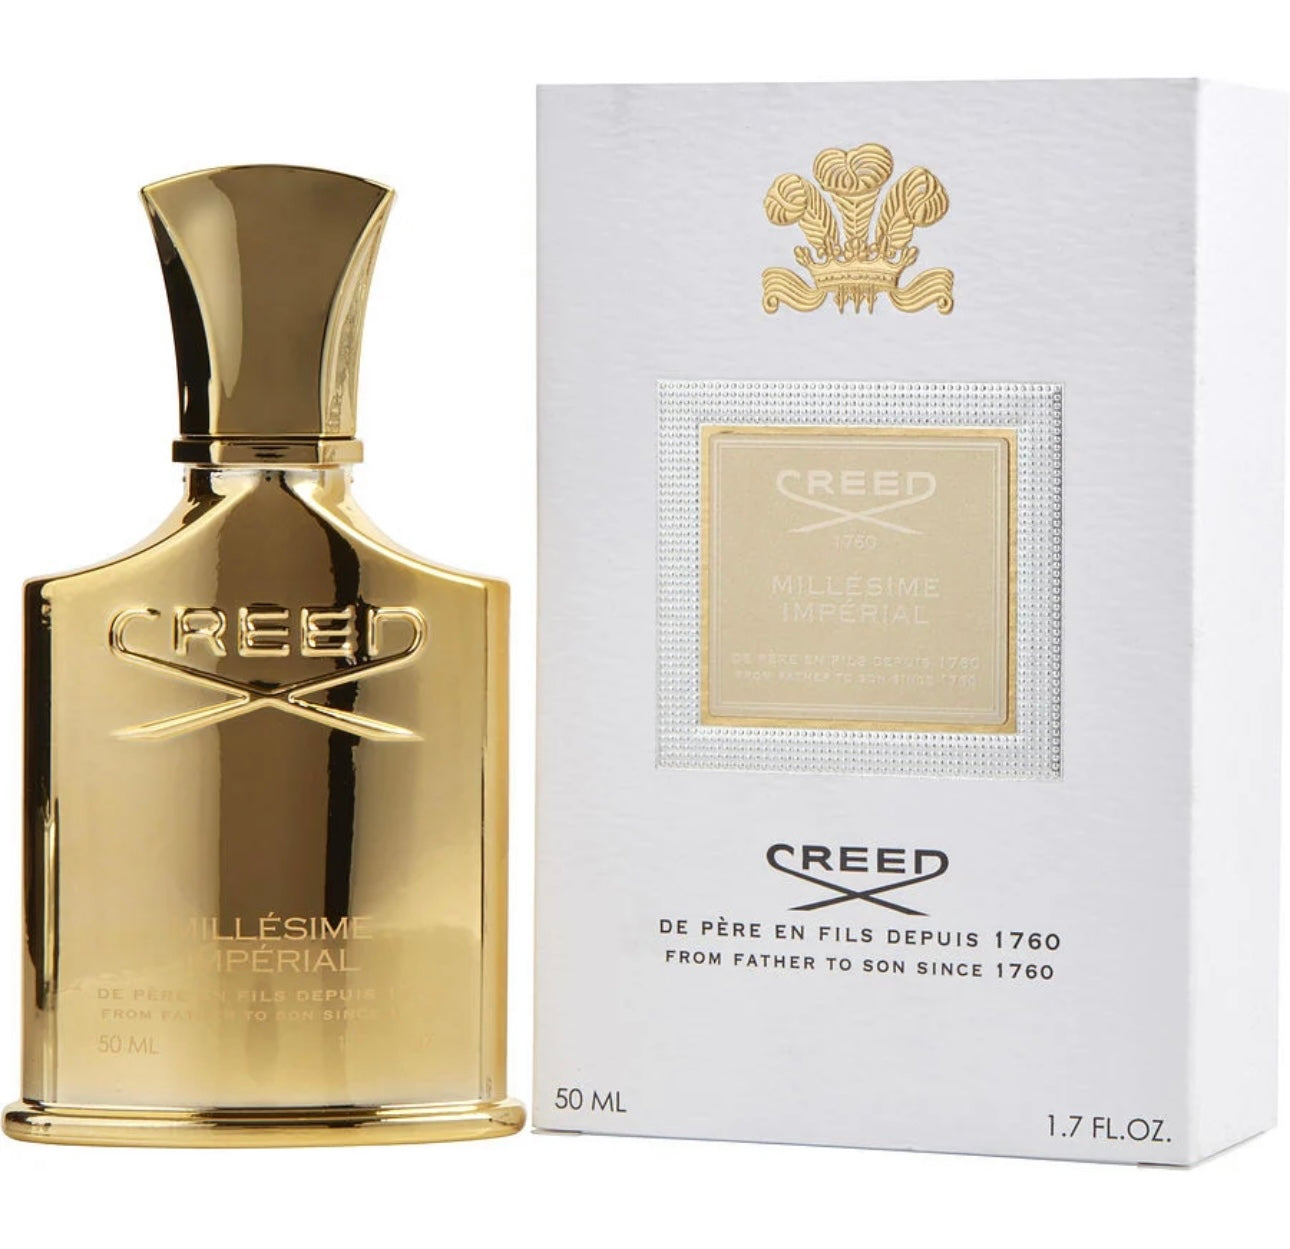 Creed- Millesime Imperial